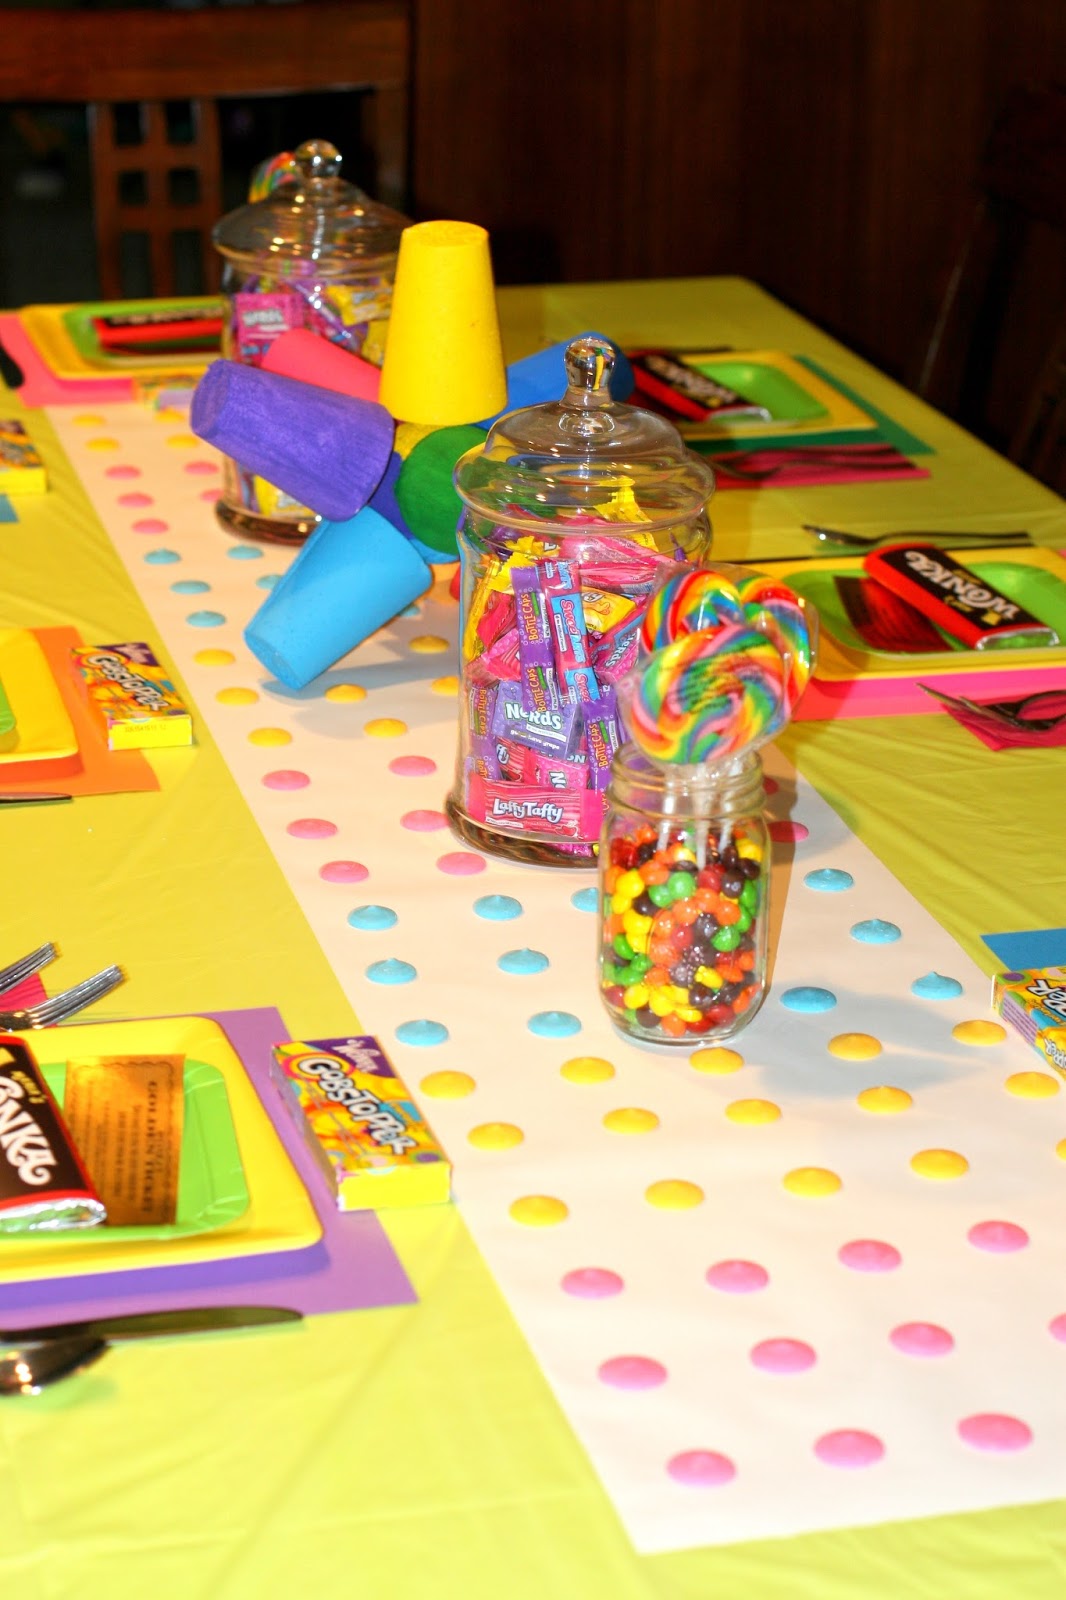 Invite and Delight: Willy Wonka Party - It's Candy Time!